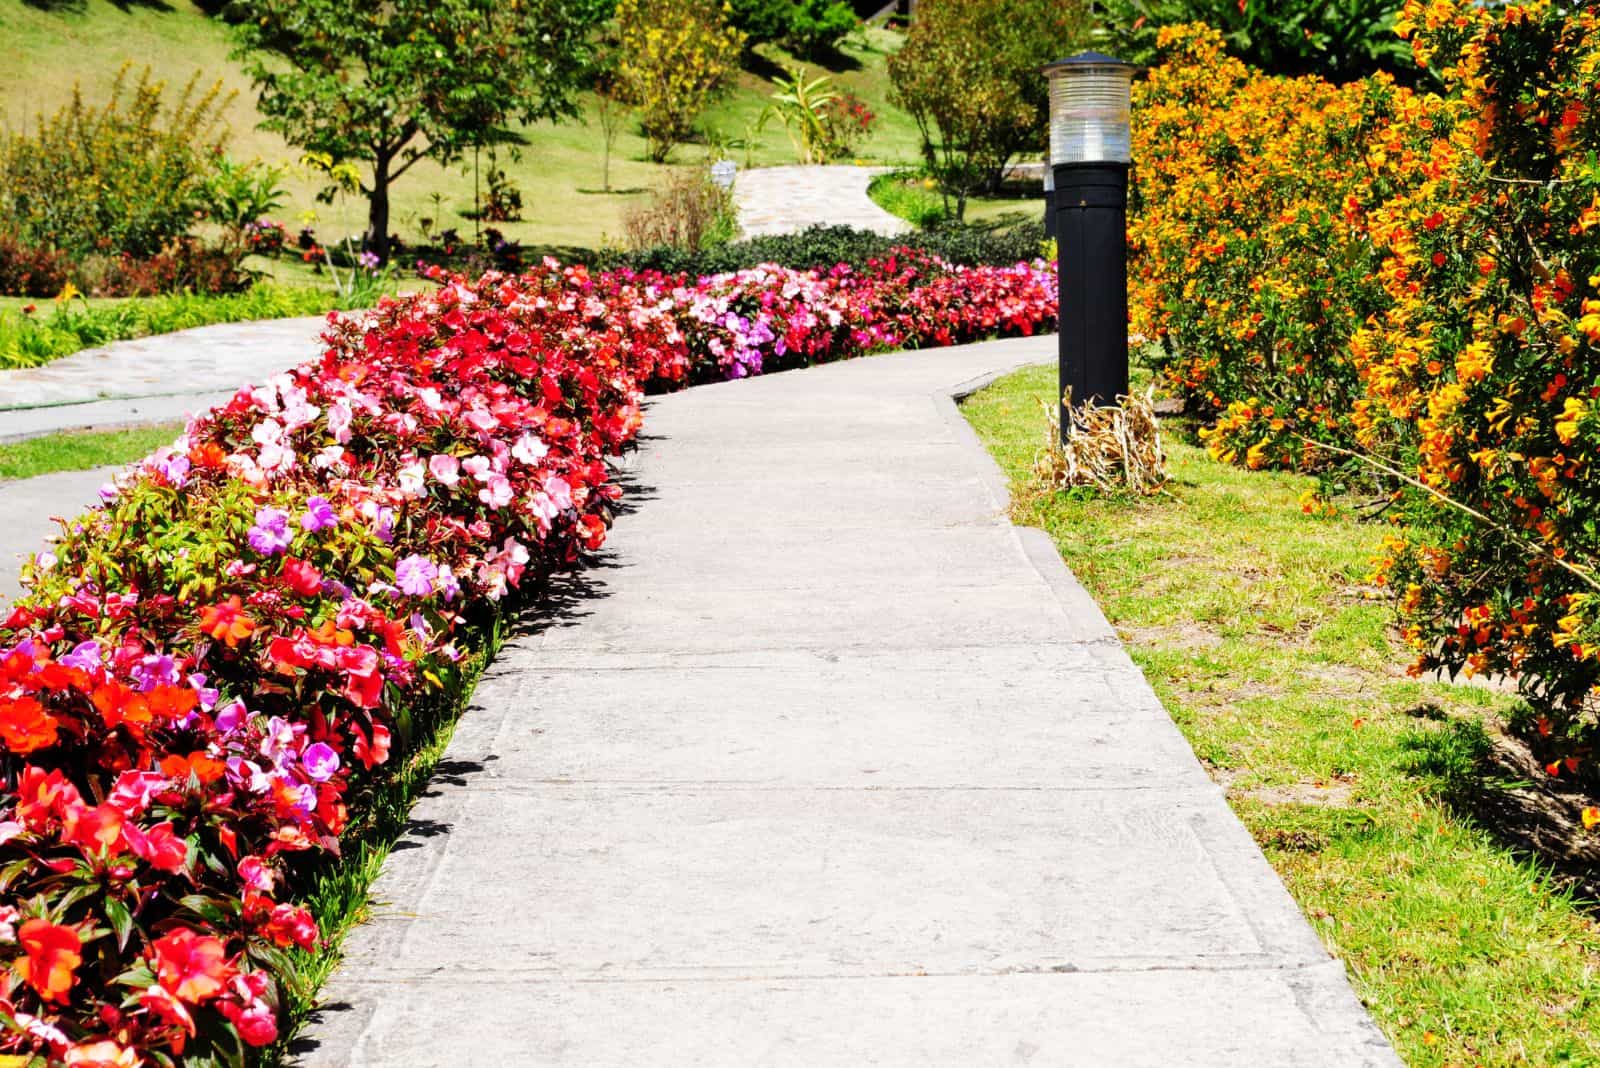 Concrete path decorated with flowers in a beautiful country home